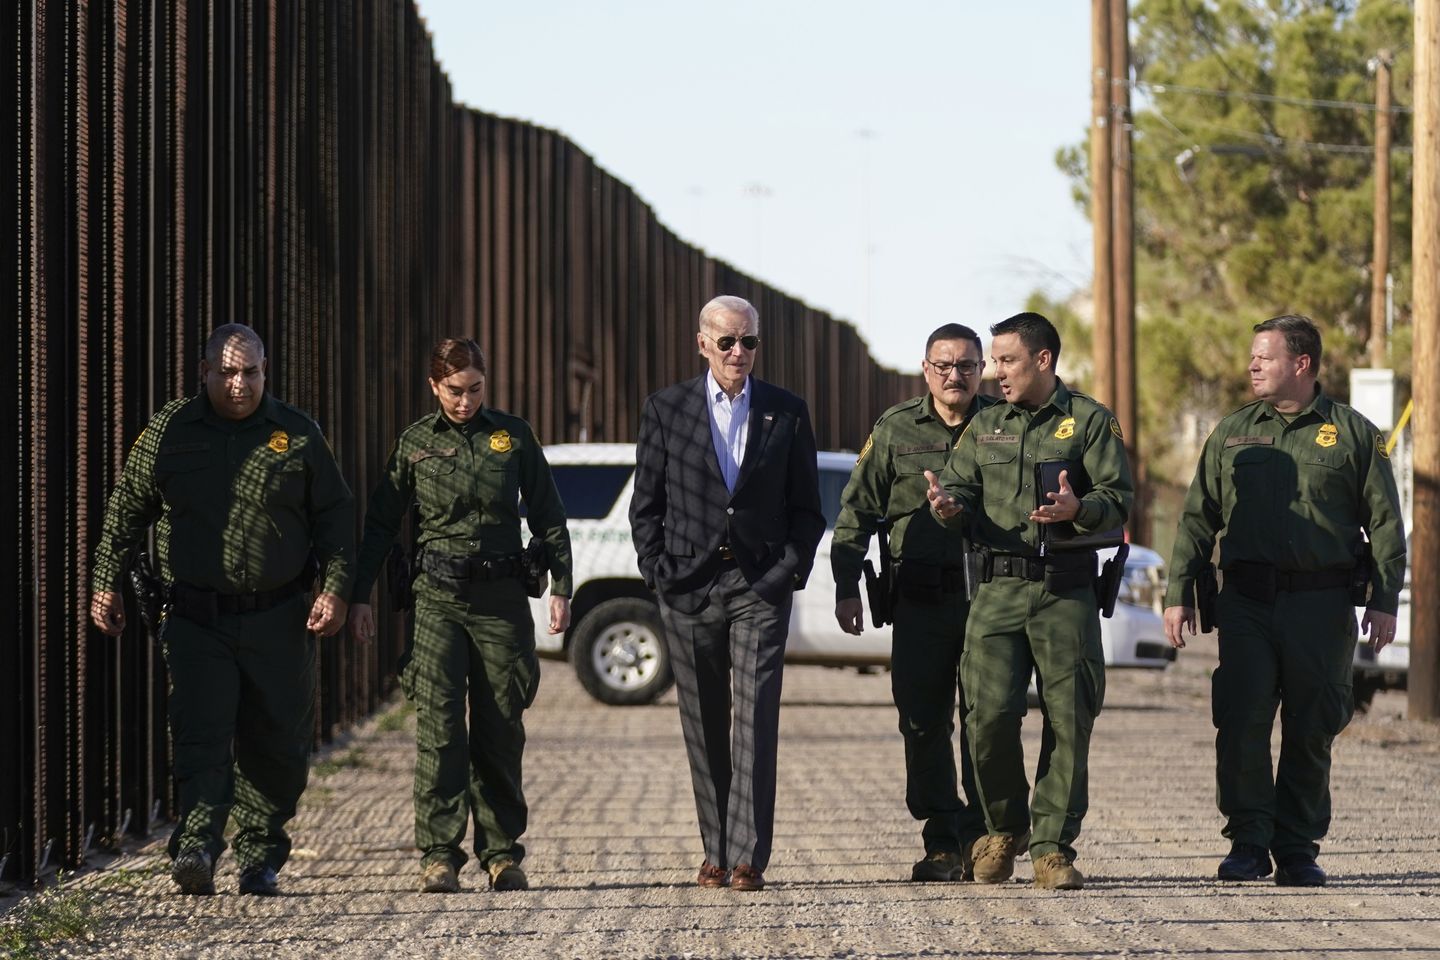 Biden In first border visit says answer is more money